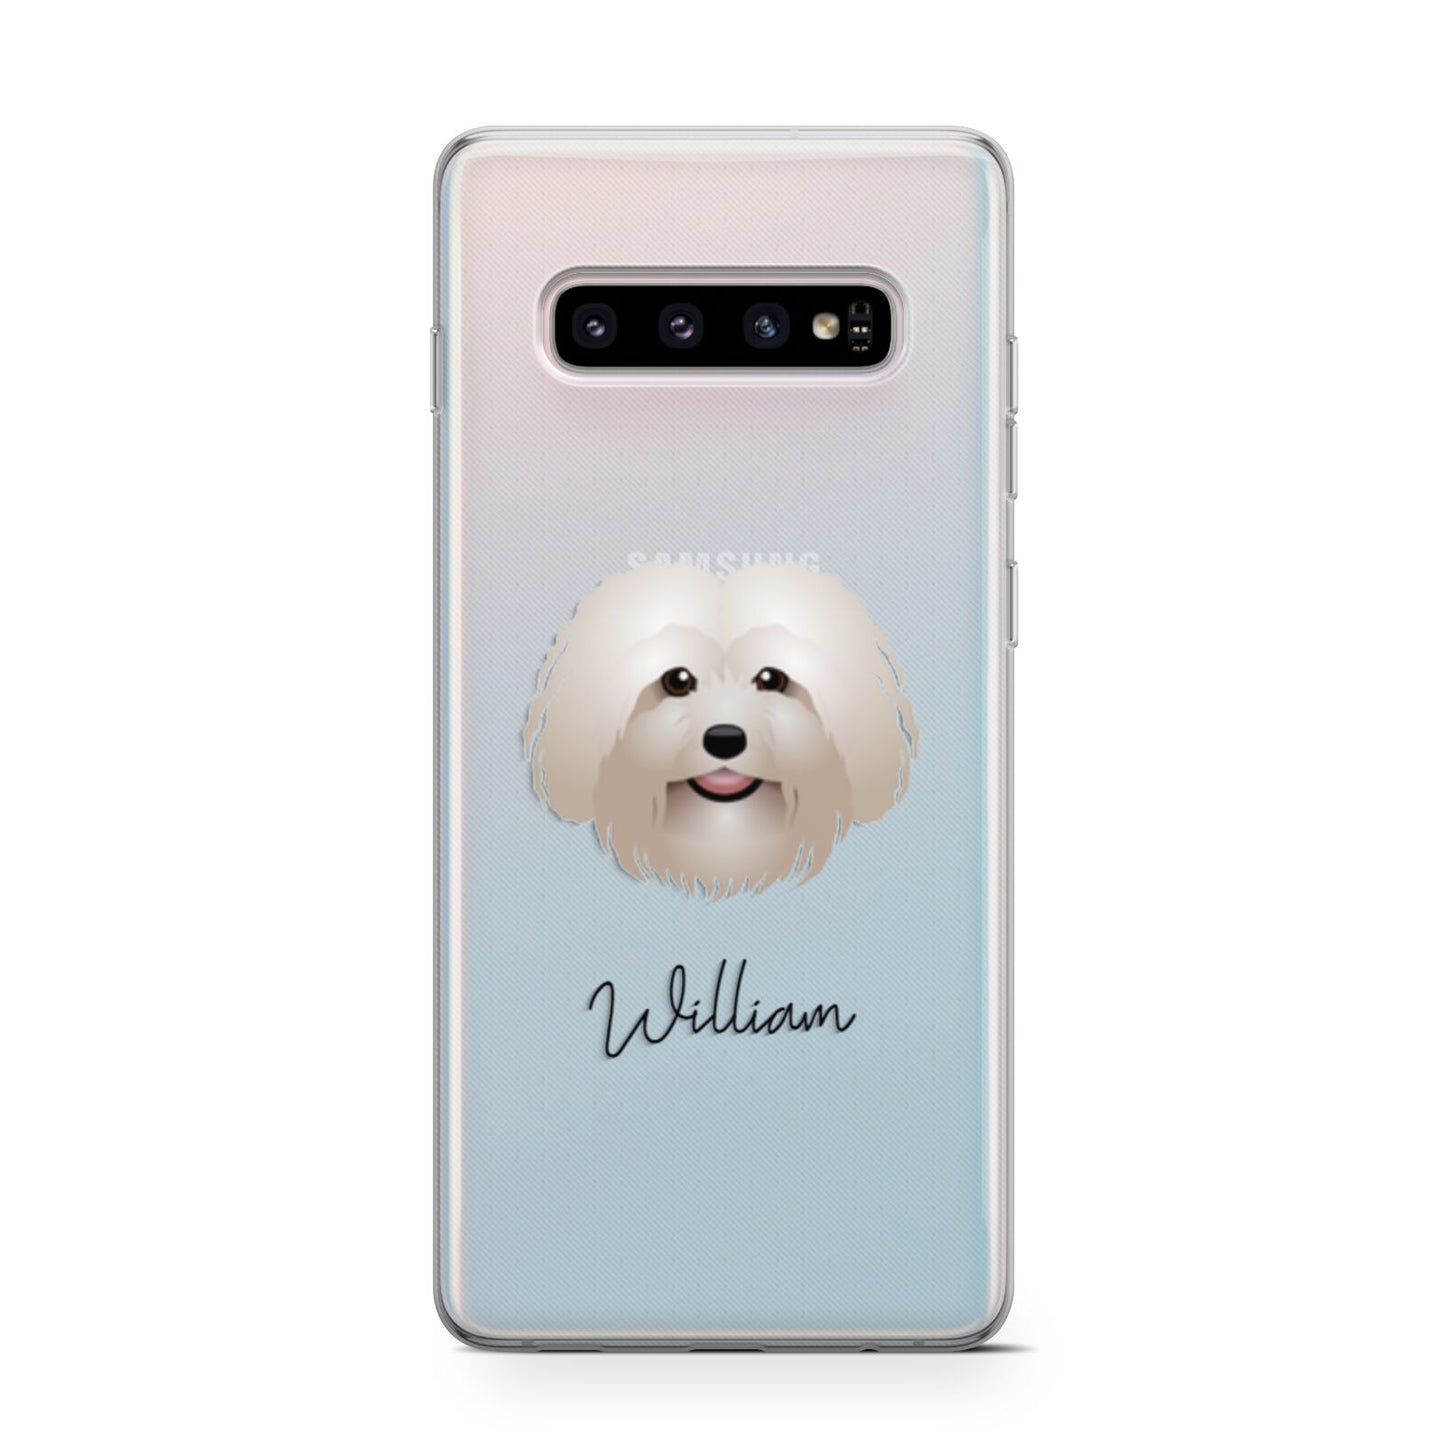 Bolognese Personalised Samsung Galaxy S10 Case